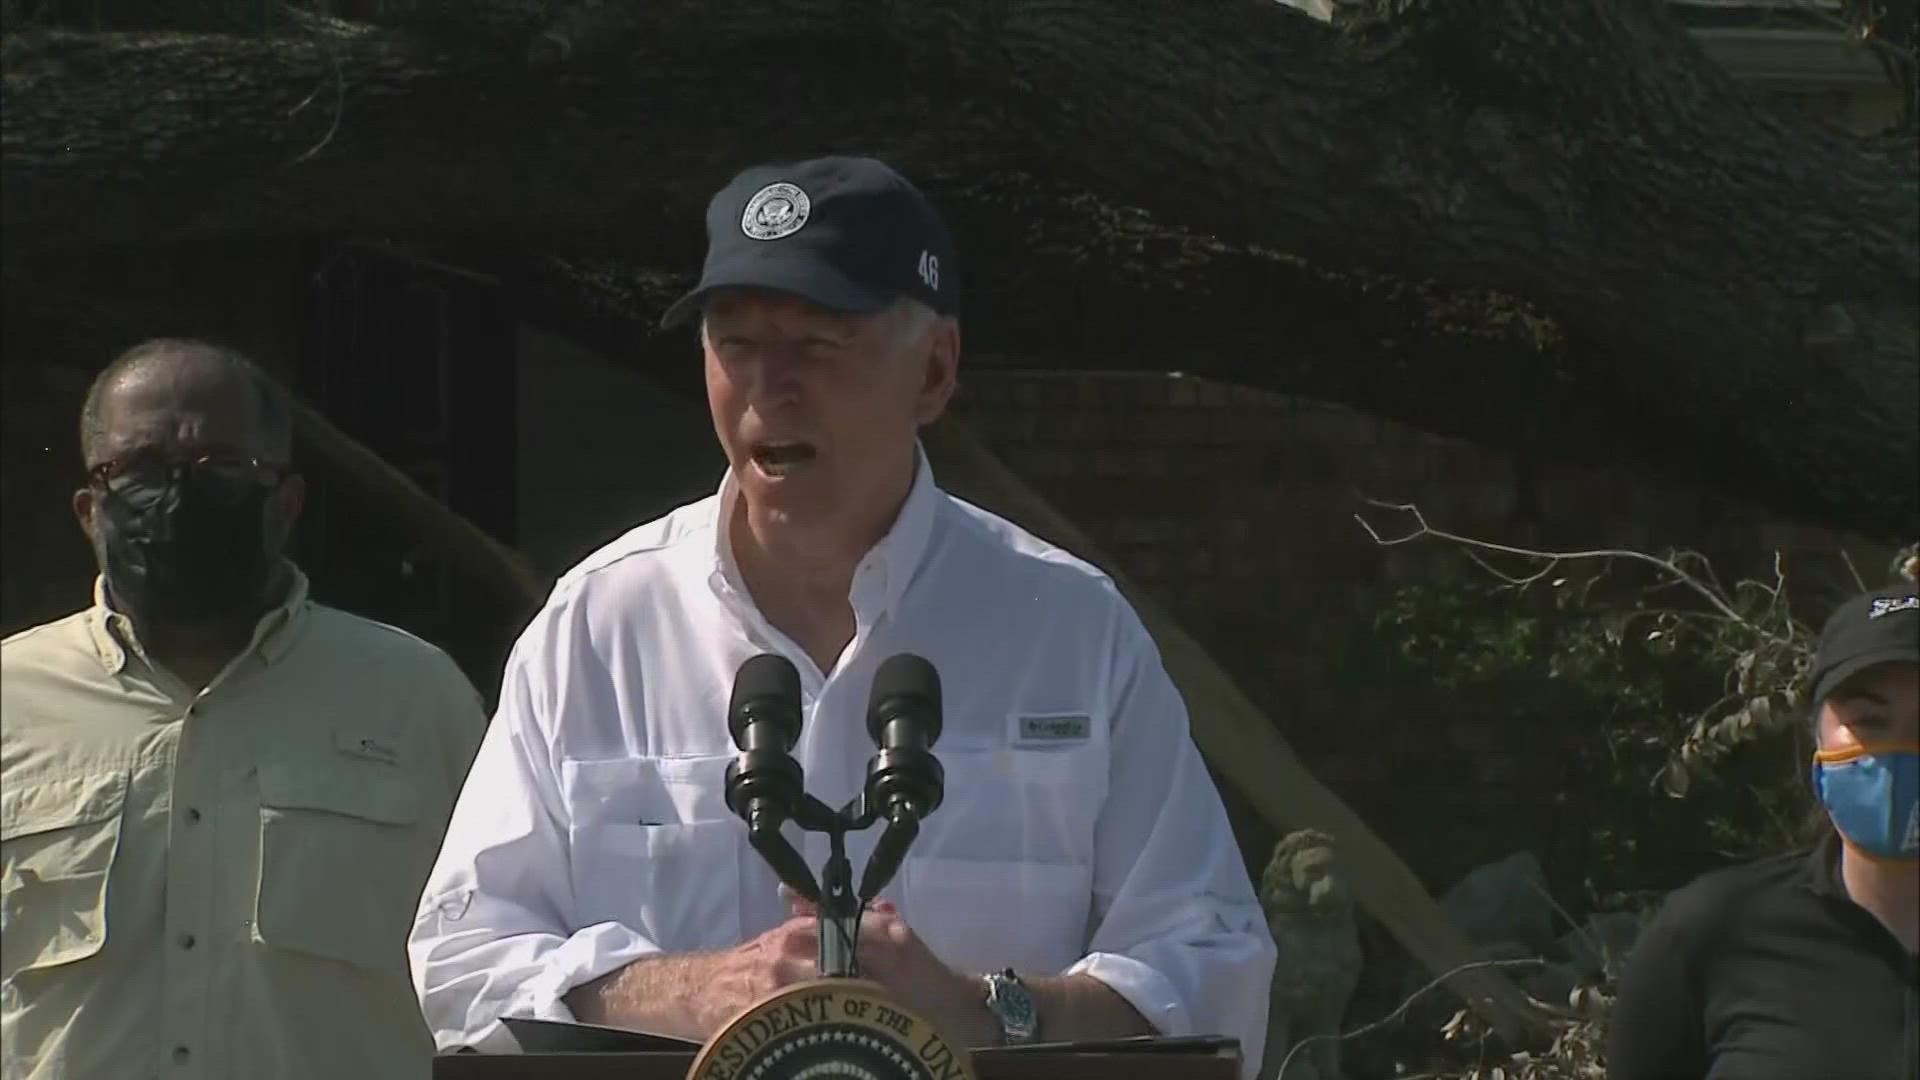 The President said FEMA would have people going door to door to inform people of available services during outages.